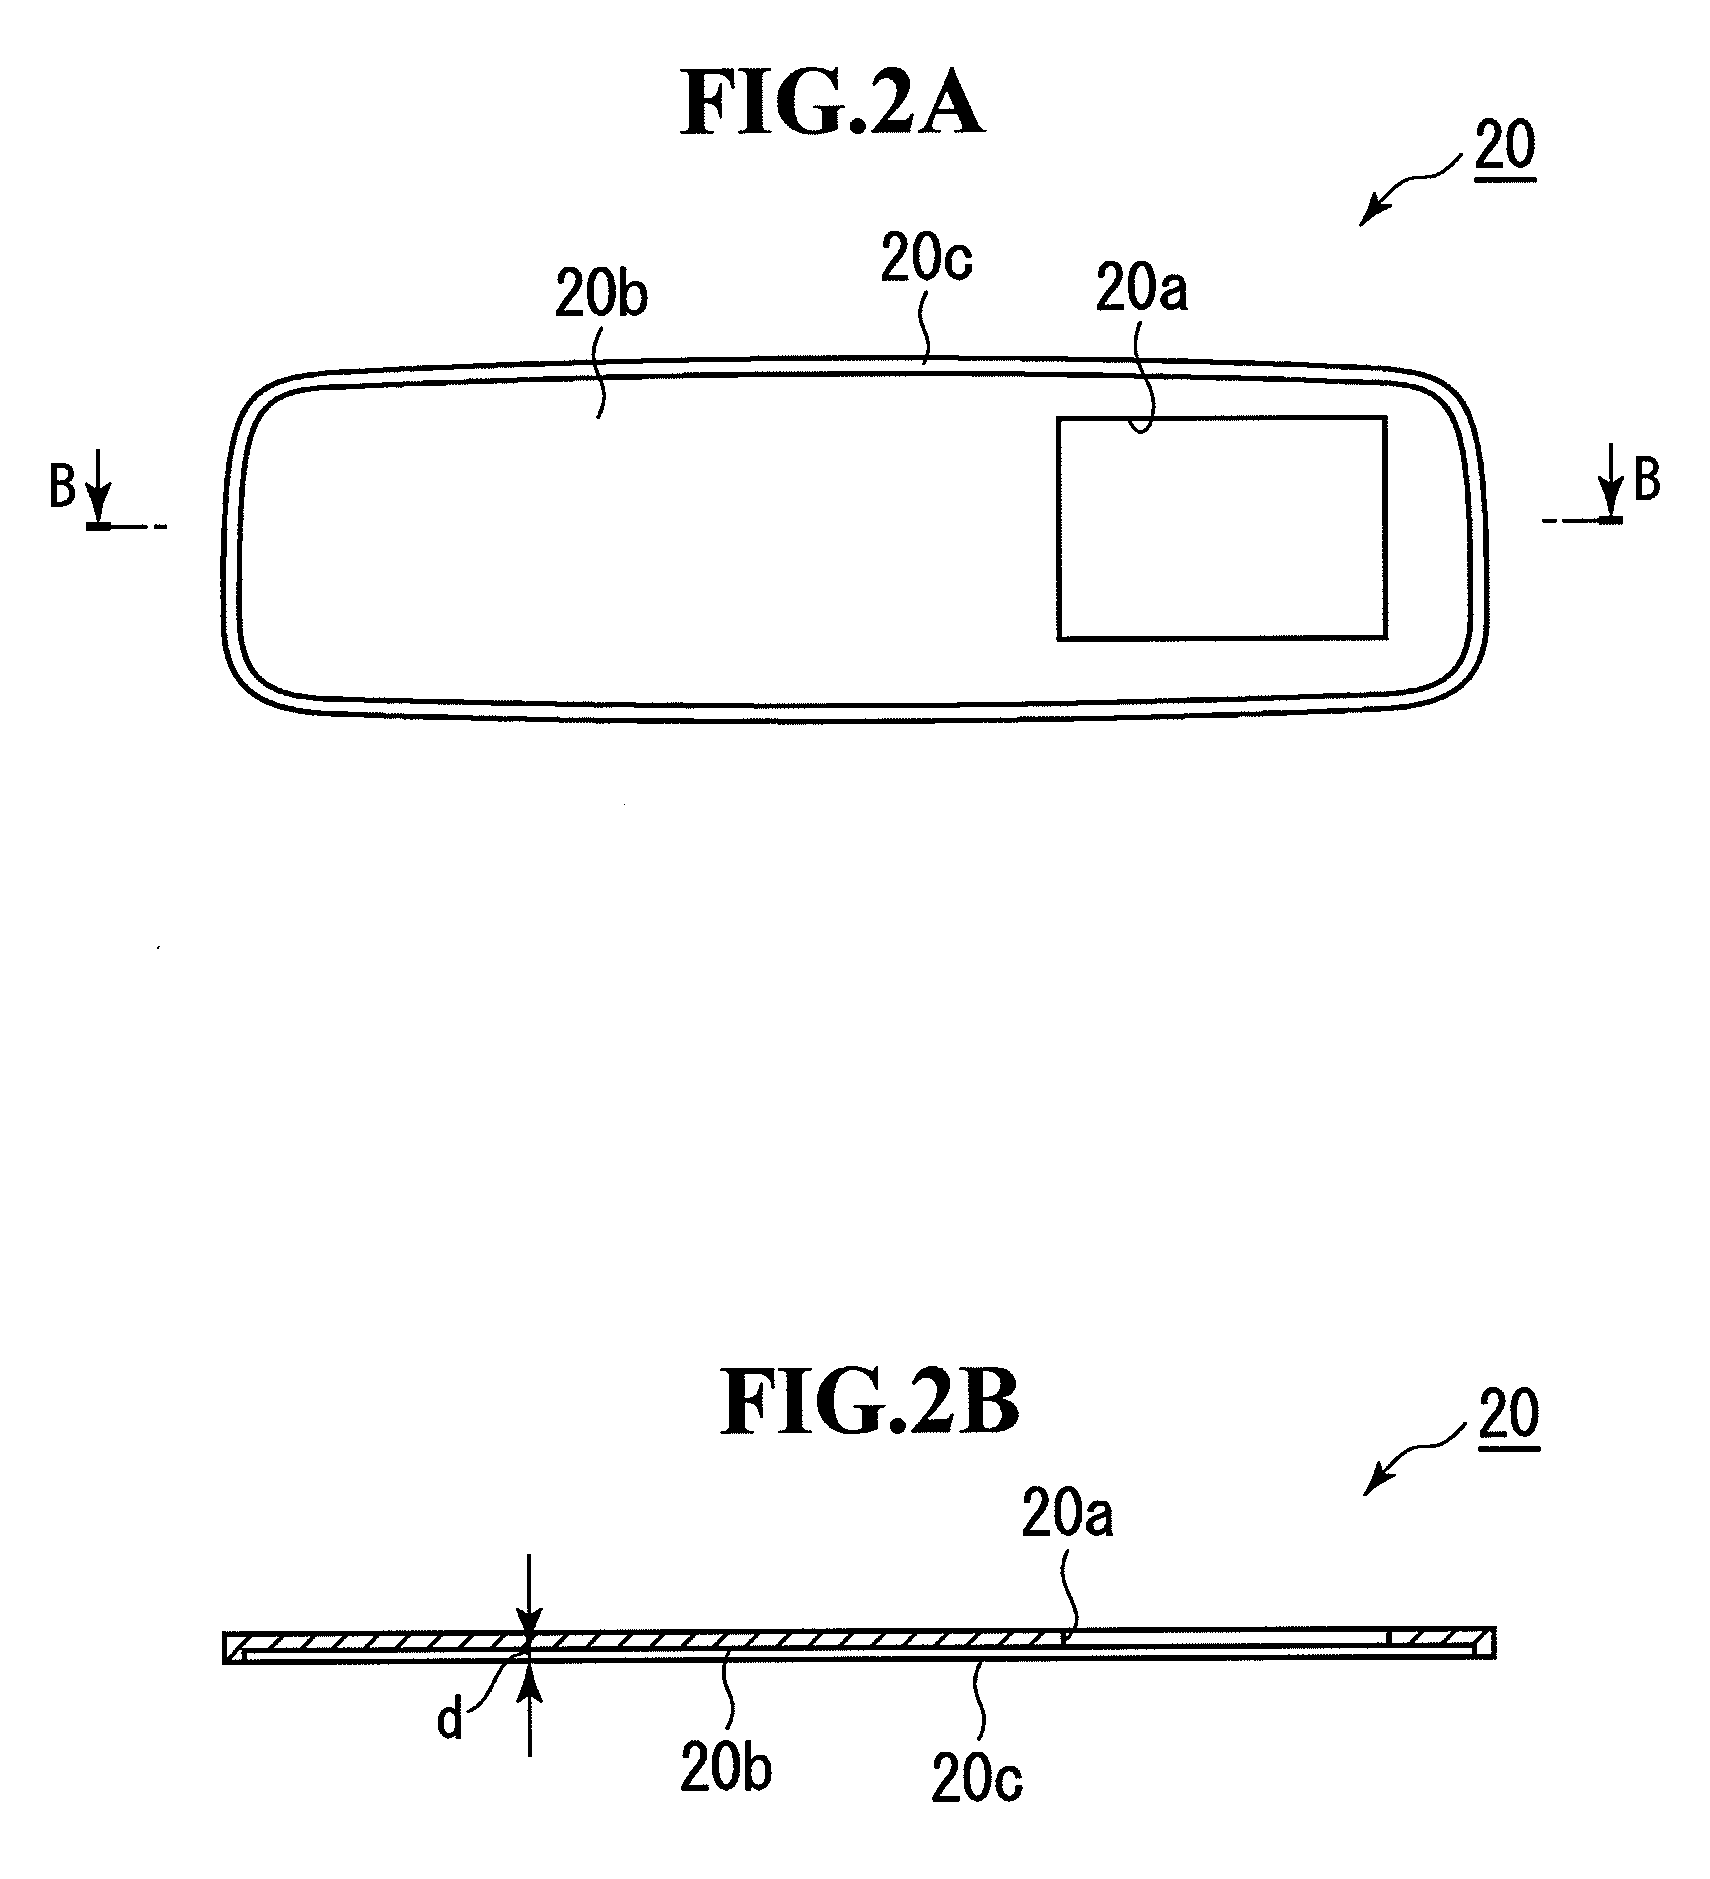 Light-emitting display device-equipped rear-view mirror